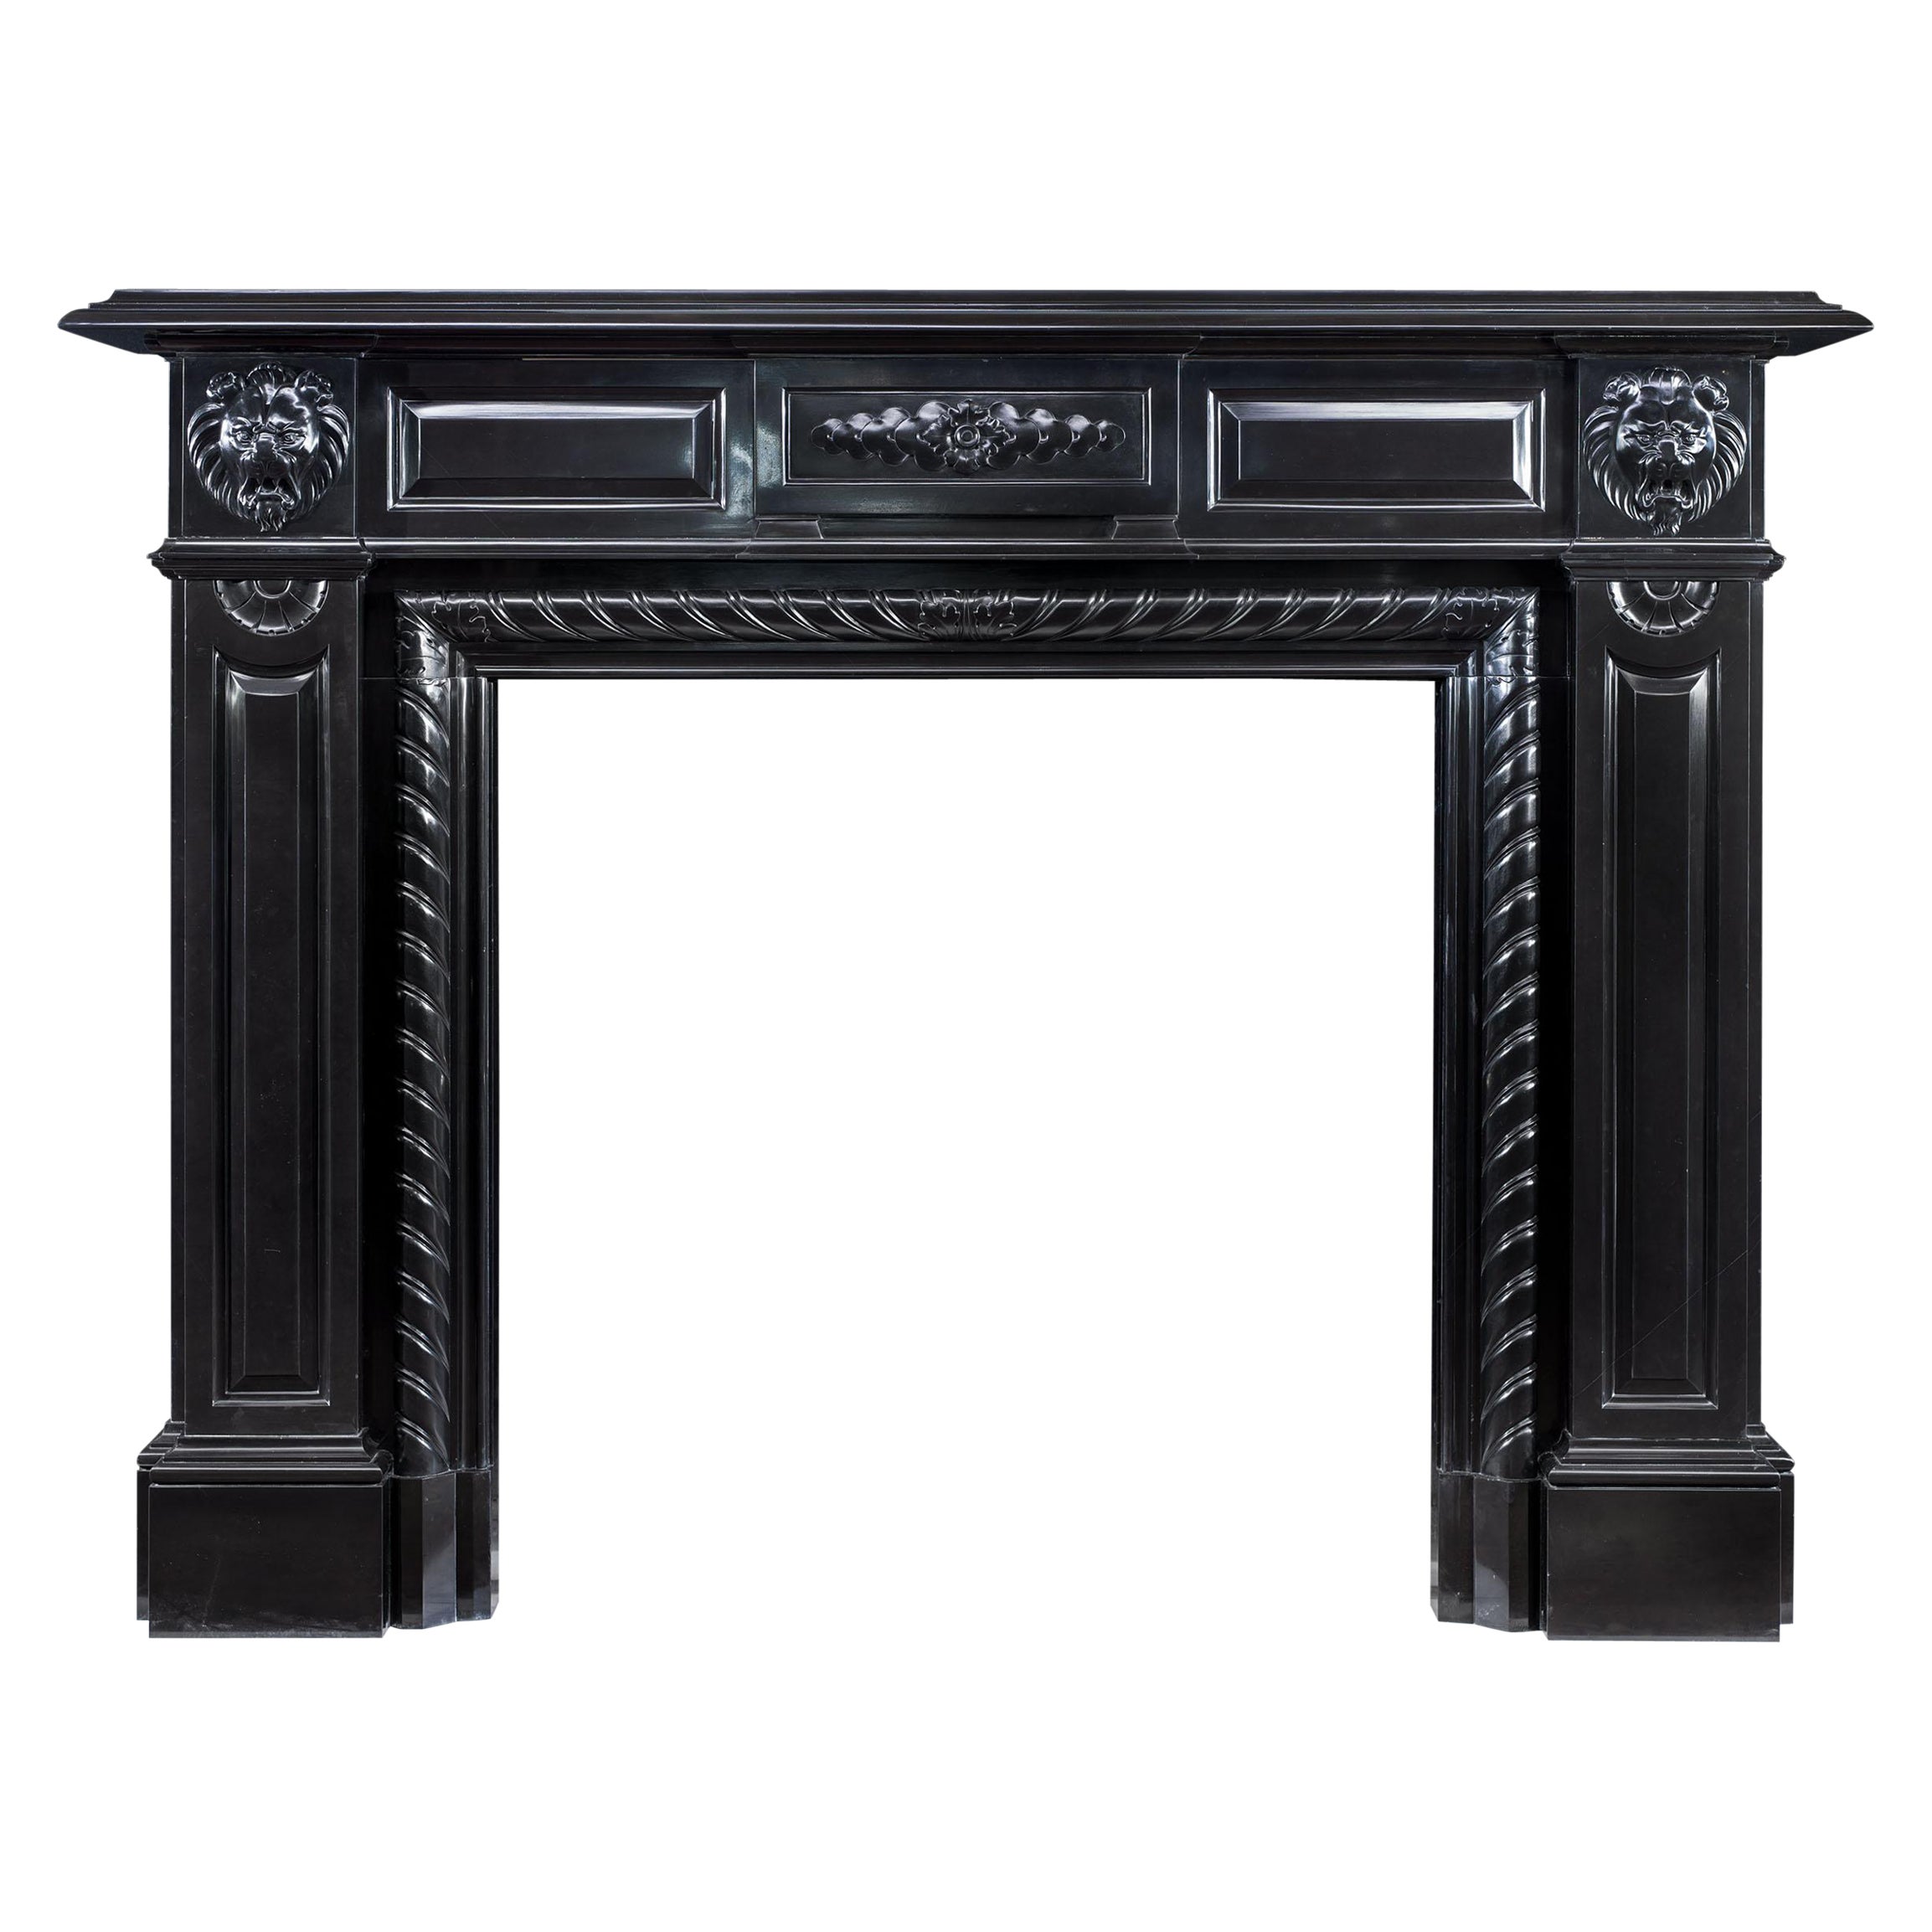 Dramatic Belgian Black Marble Fireplace For Sale